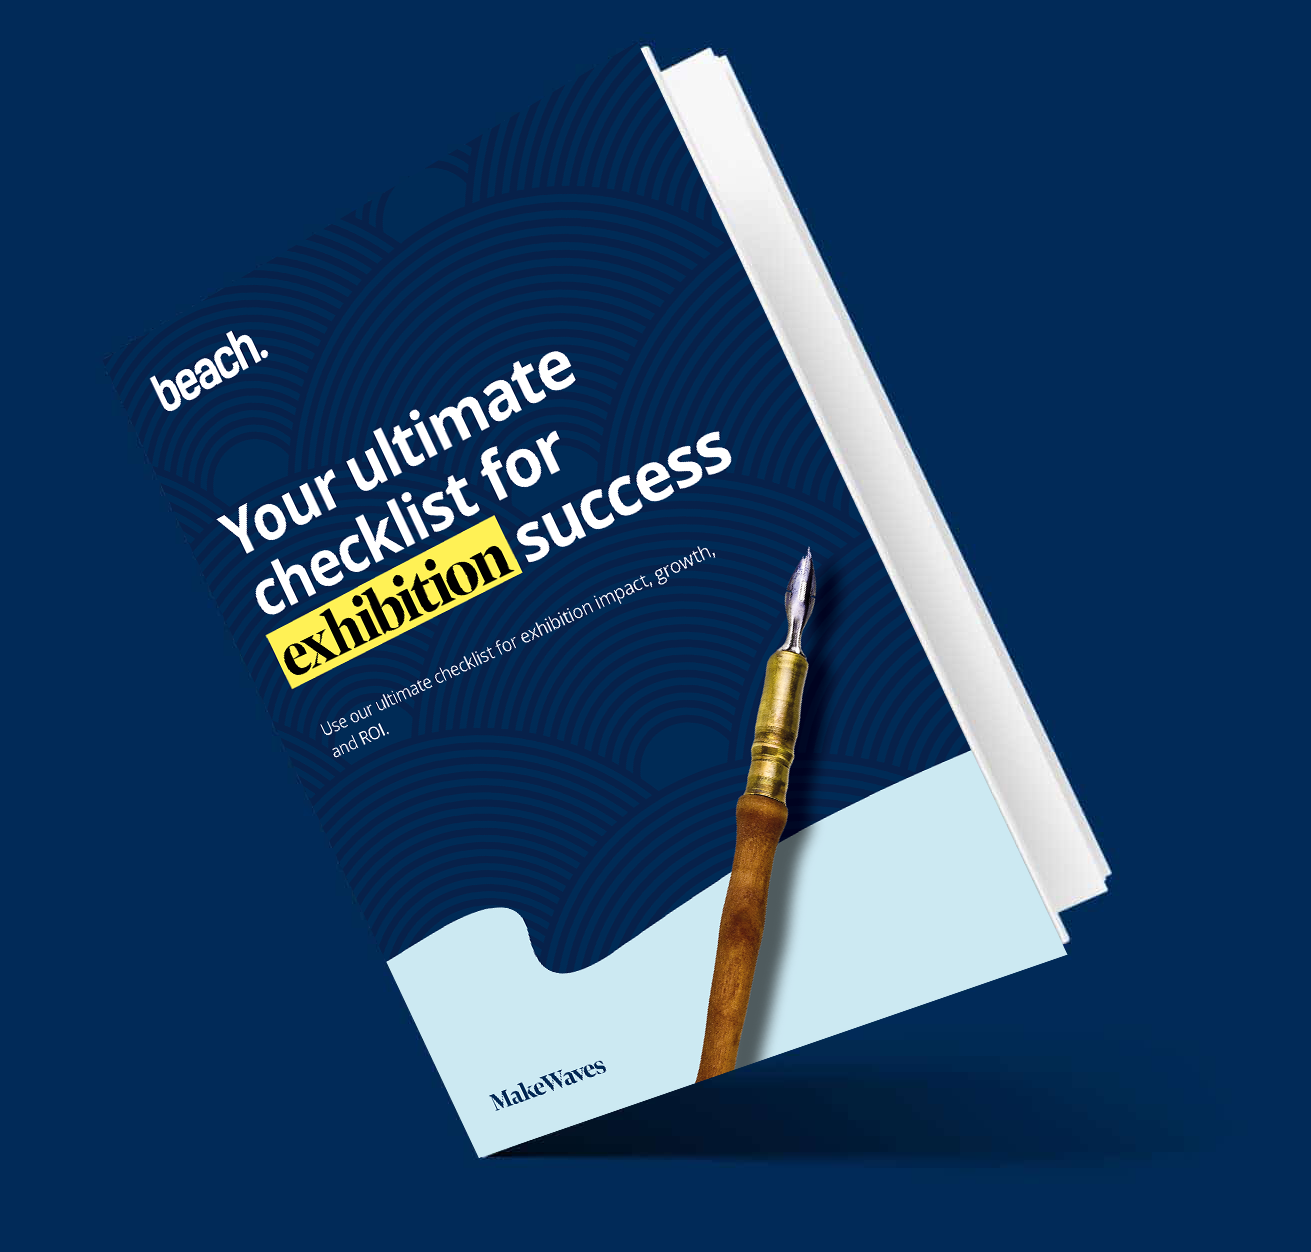 Download our ultimate checklist for exhibition success at any trade show